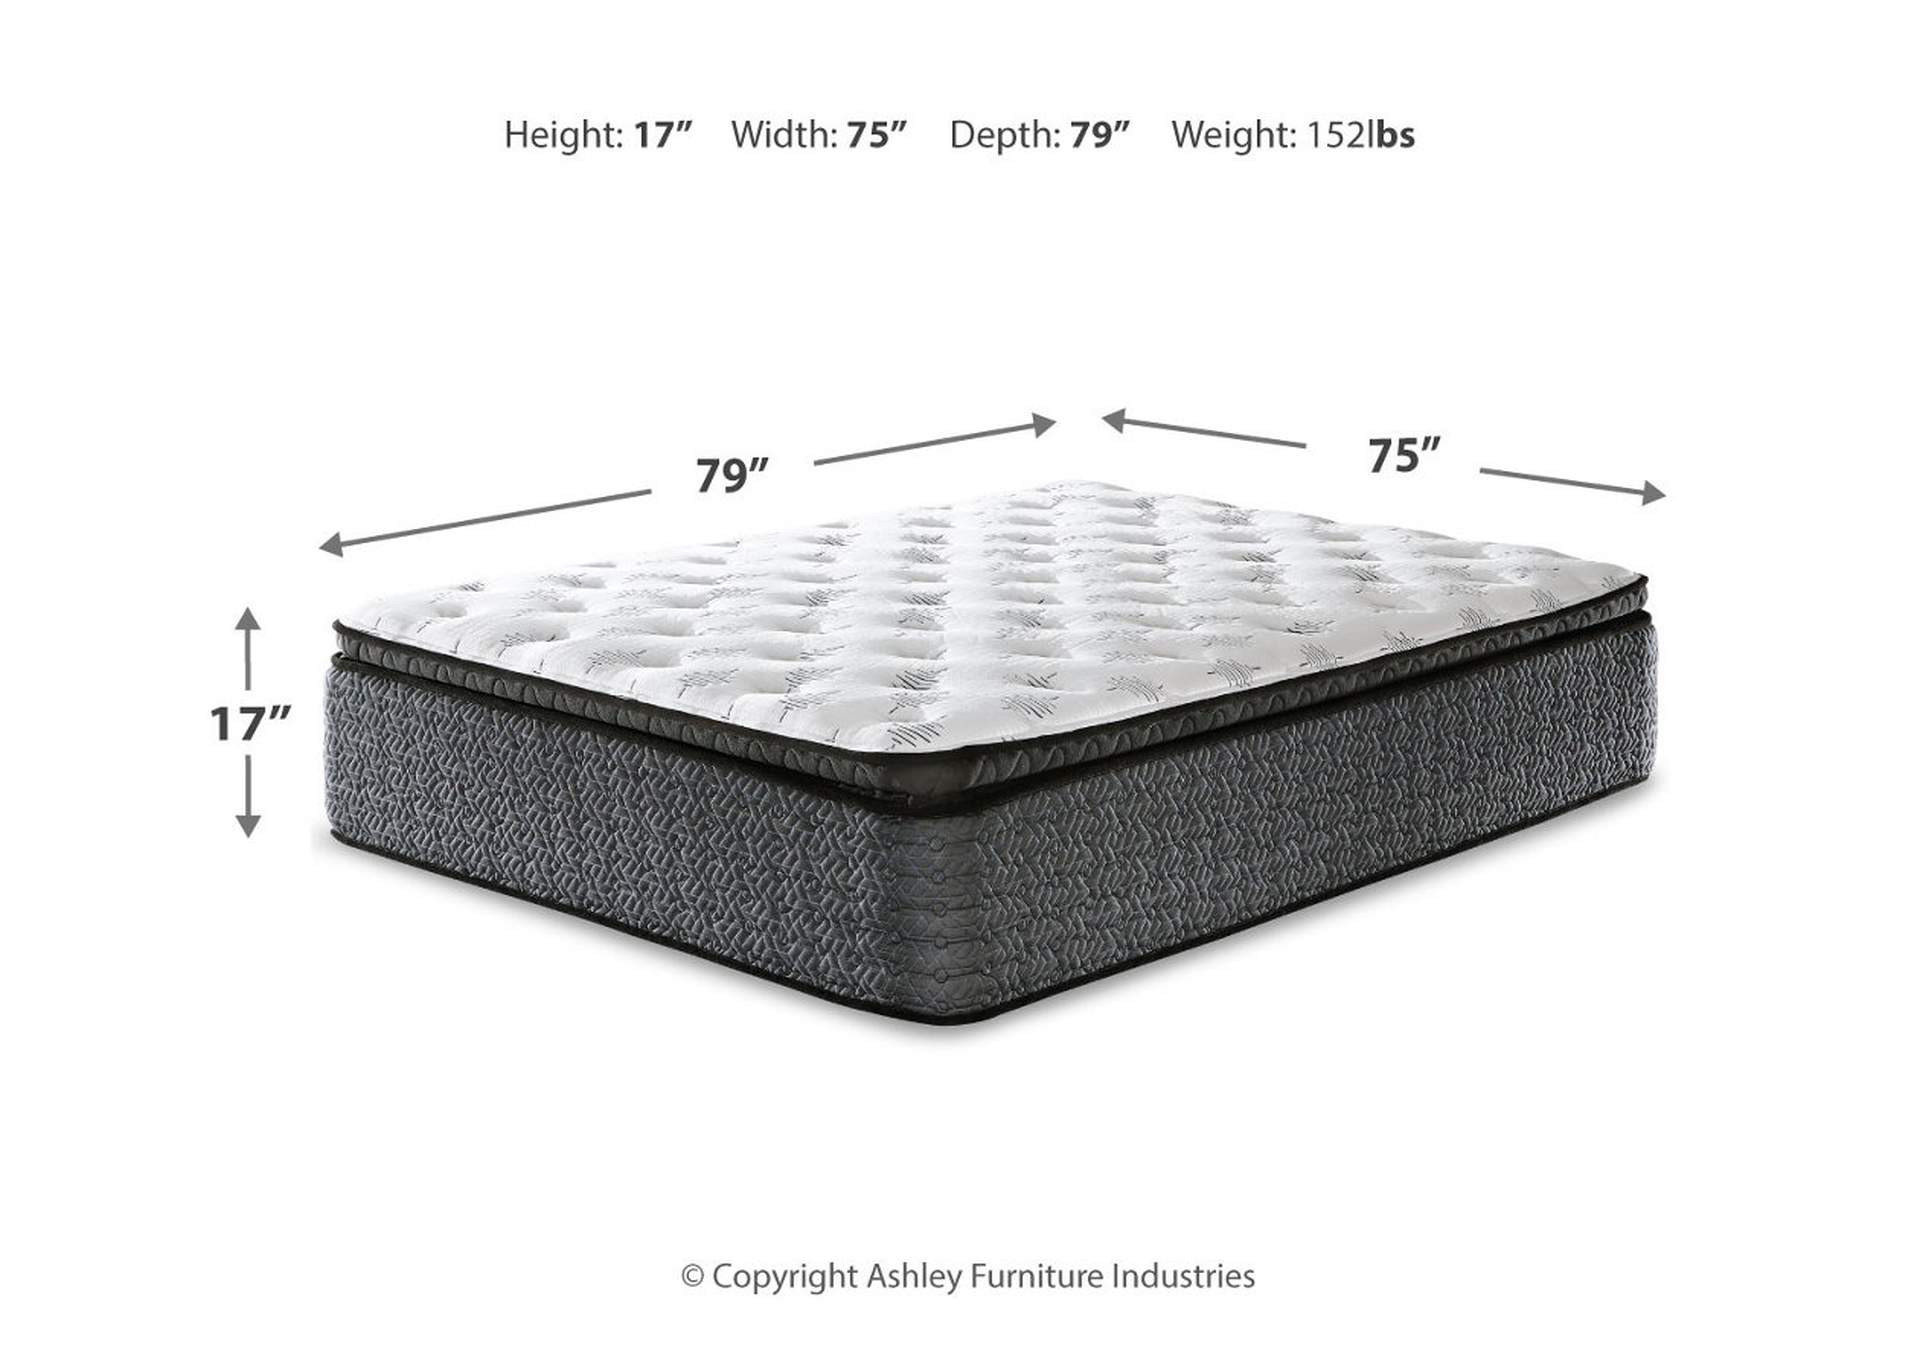 Ultra Luxury PT with Latex Mattress with Adjustable Base,Sierra Sleep by Ashley